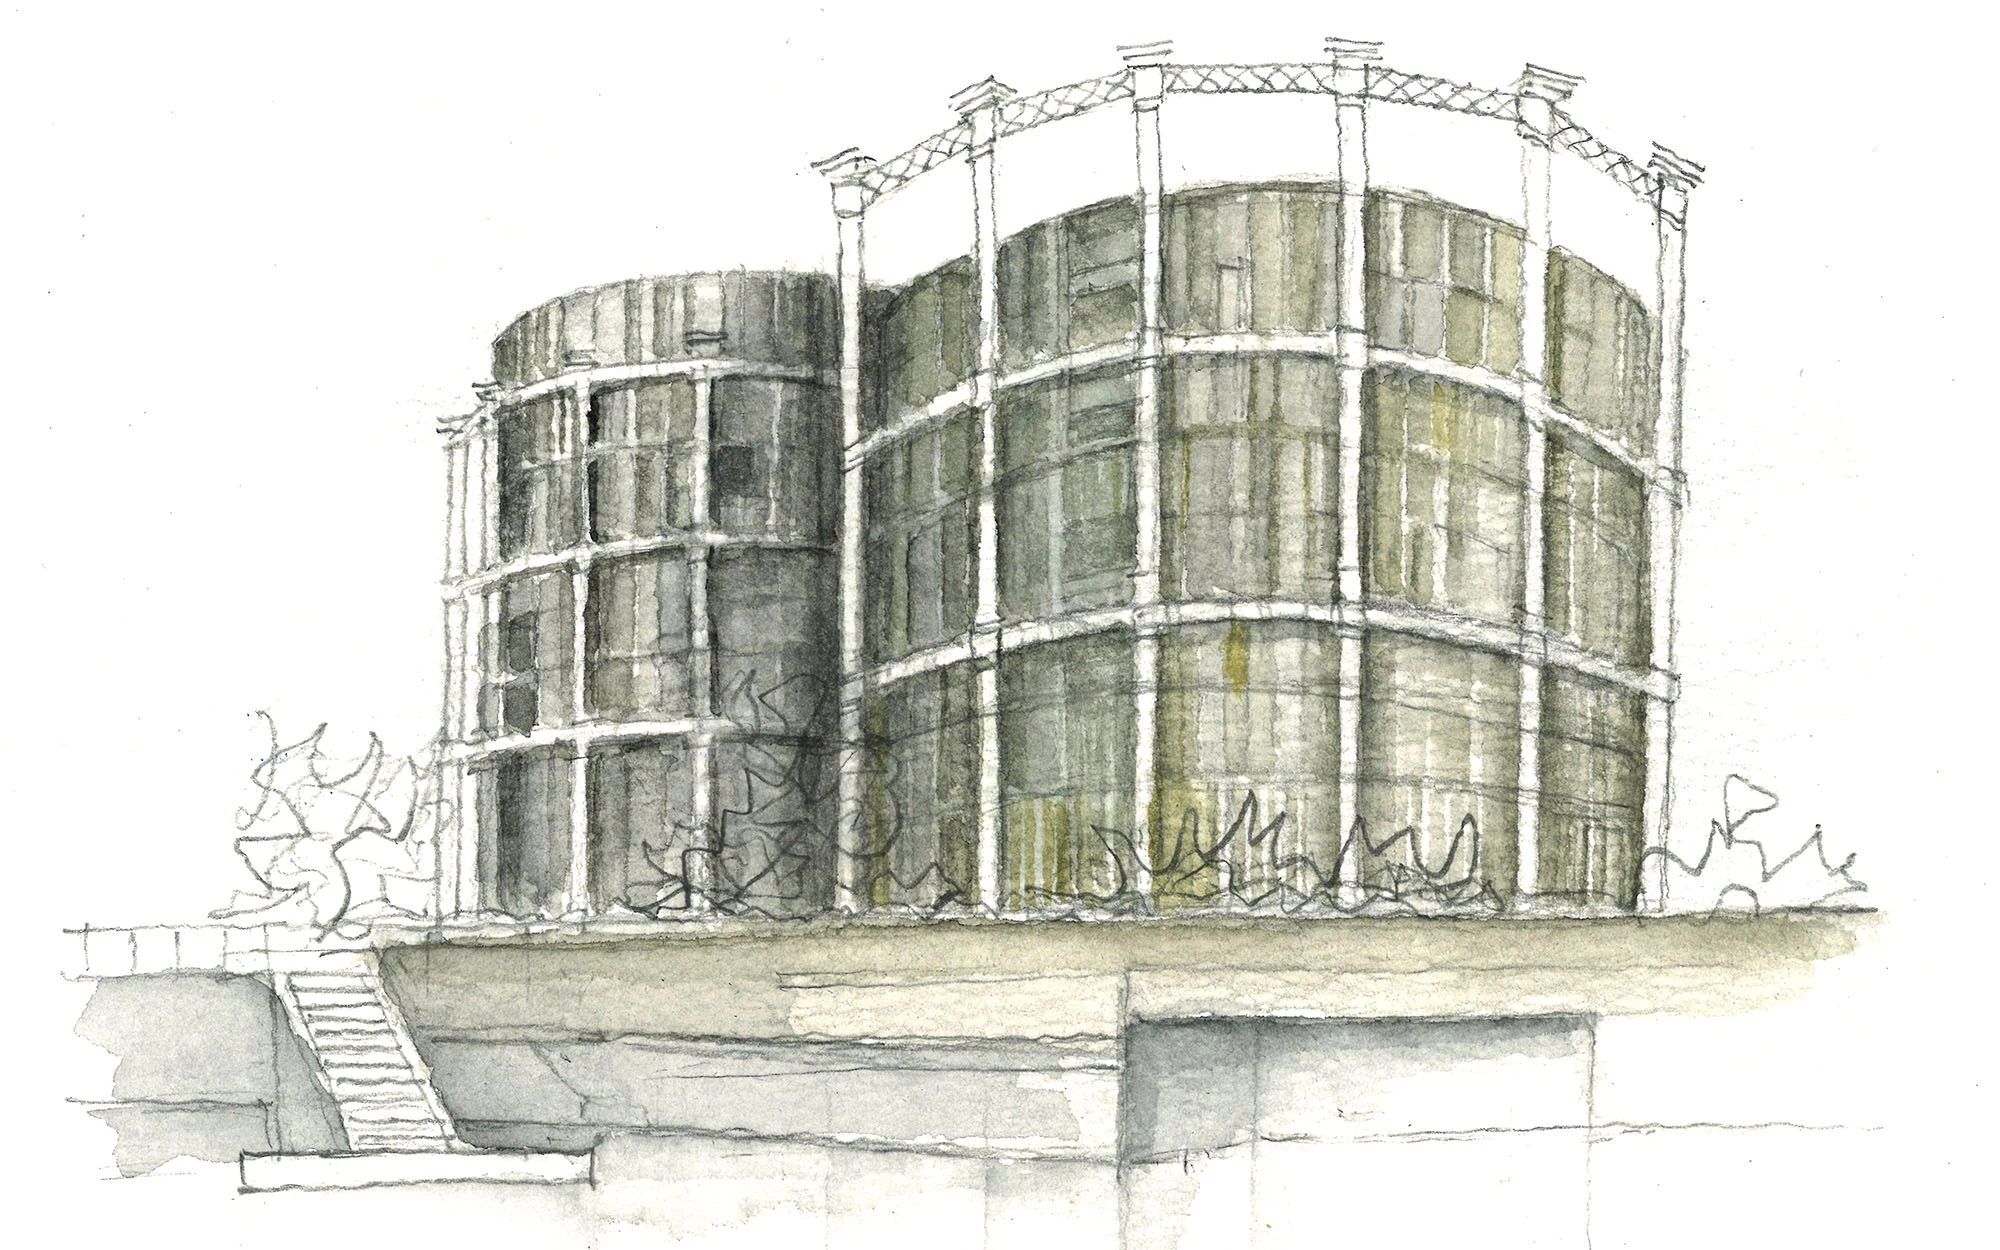 Early concept sketch of gasholders